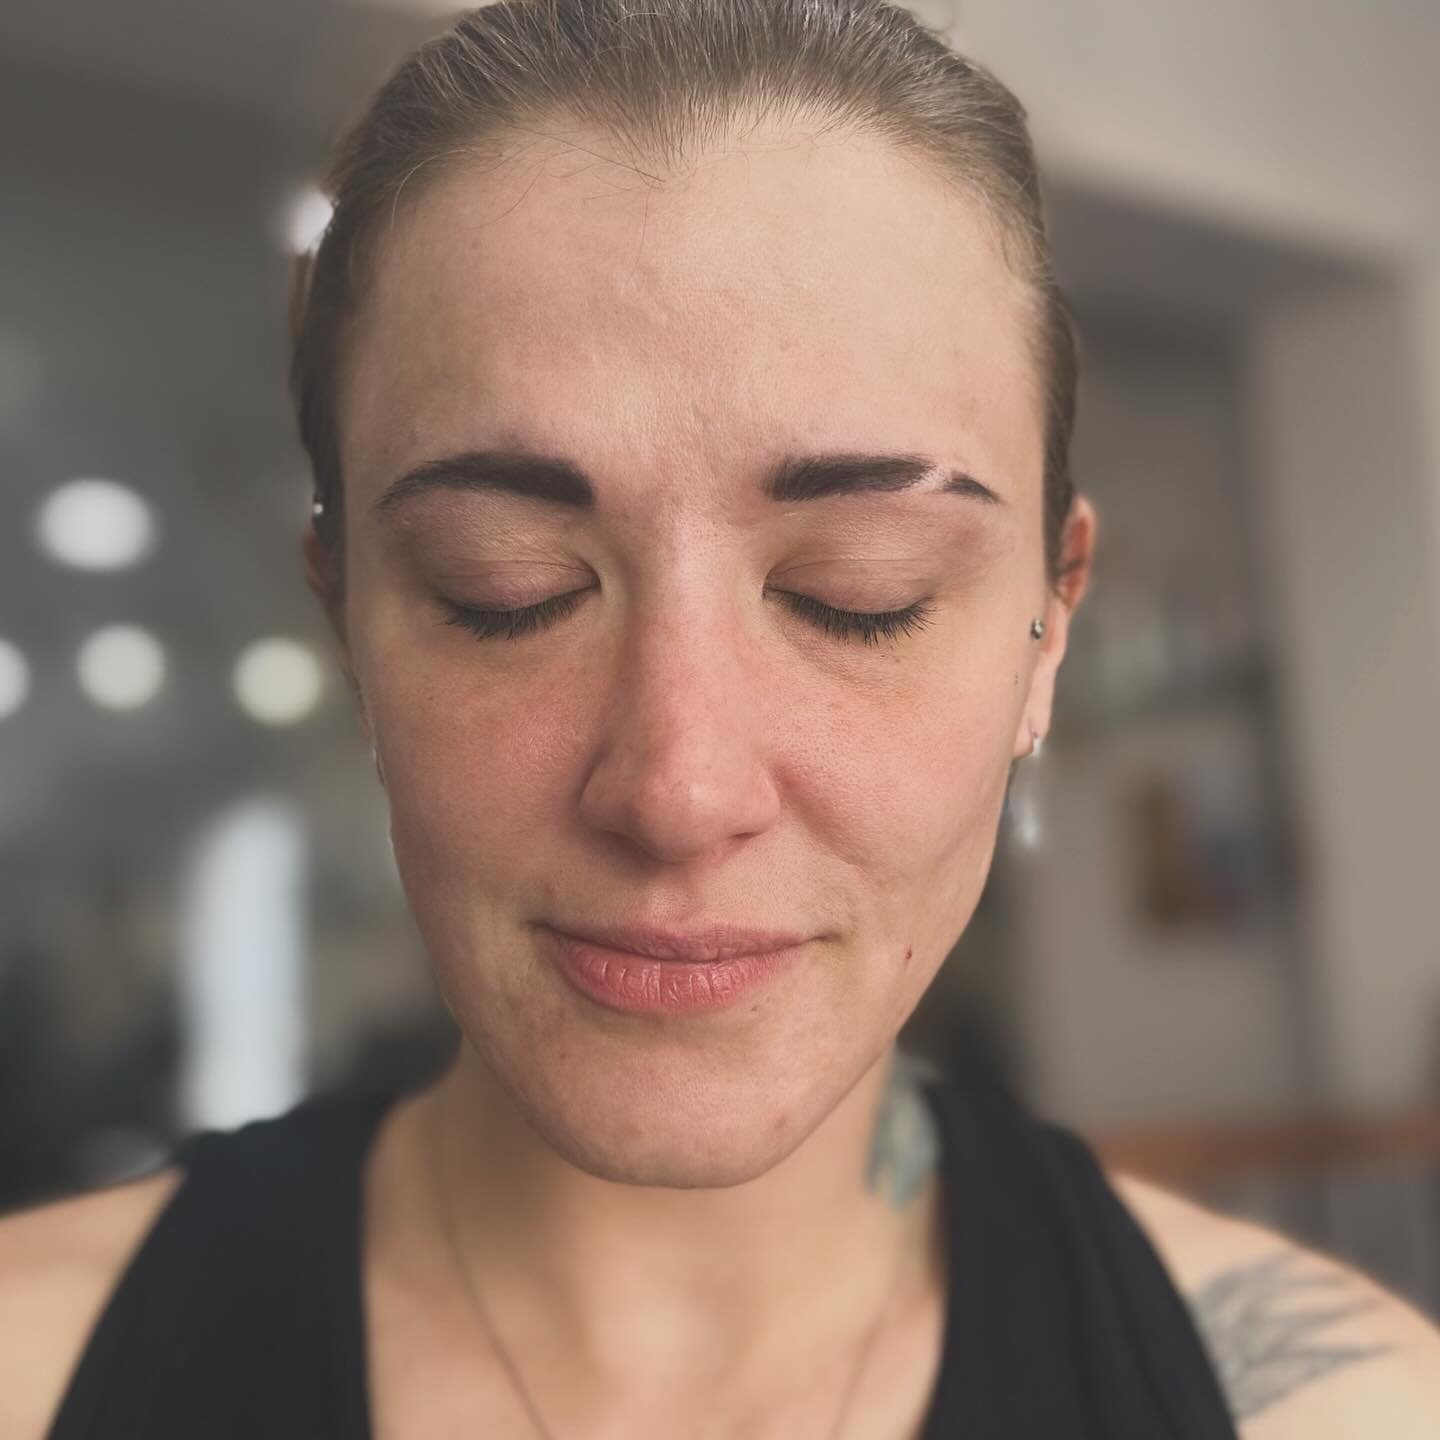 Don&rsquo;t forgot to book your next eyebrow lamination with your next hair appointment! 

Or stop in and see @pasha_pamfox for an eyebrow wax 💕

📍Top Knotch Salon 
108 East Maple Ave
Langhorne, PA 19047
📞 (215) 741 - 7041 

Link in Bio to Book an